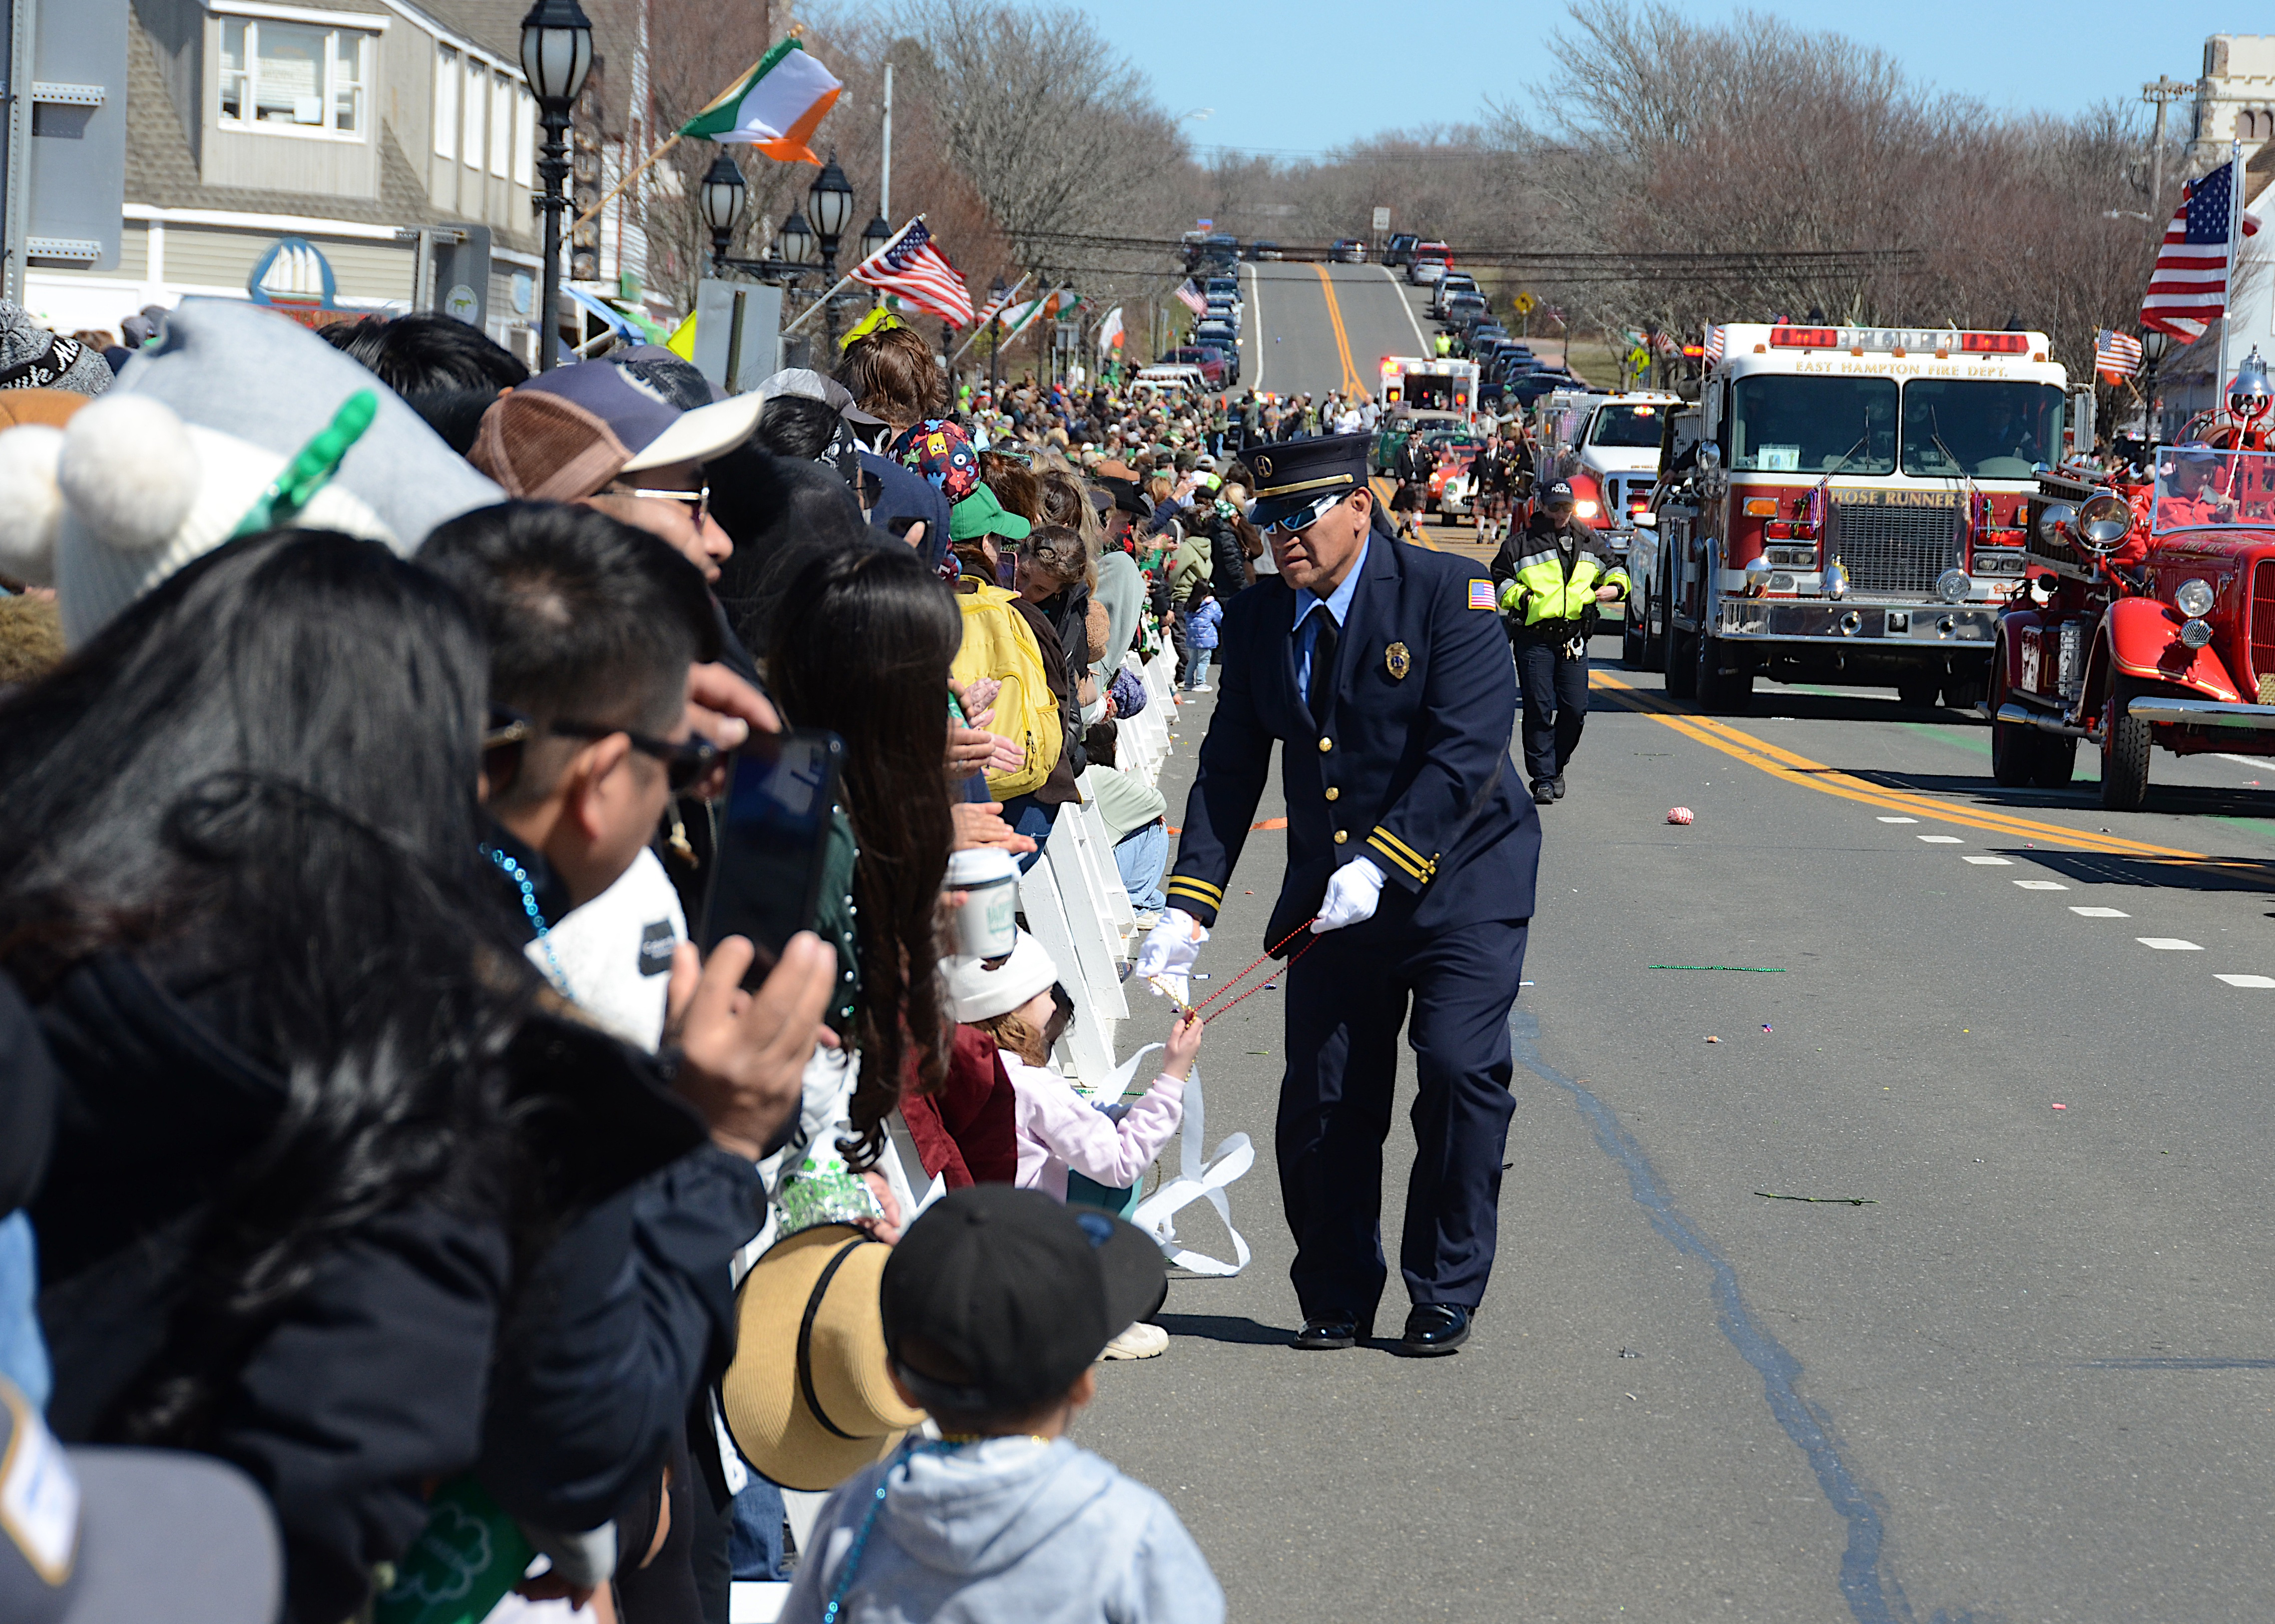 Scenes front the Montauk St. Patrick's Day parade.